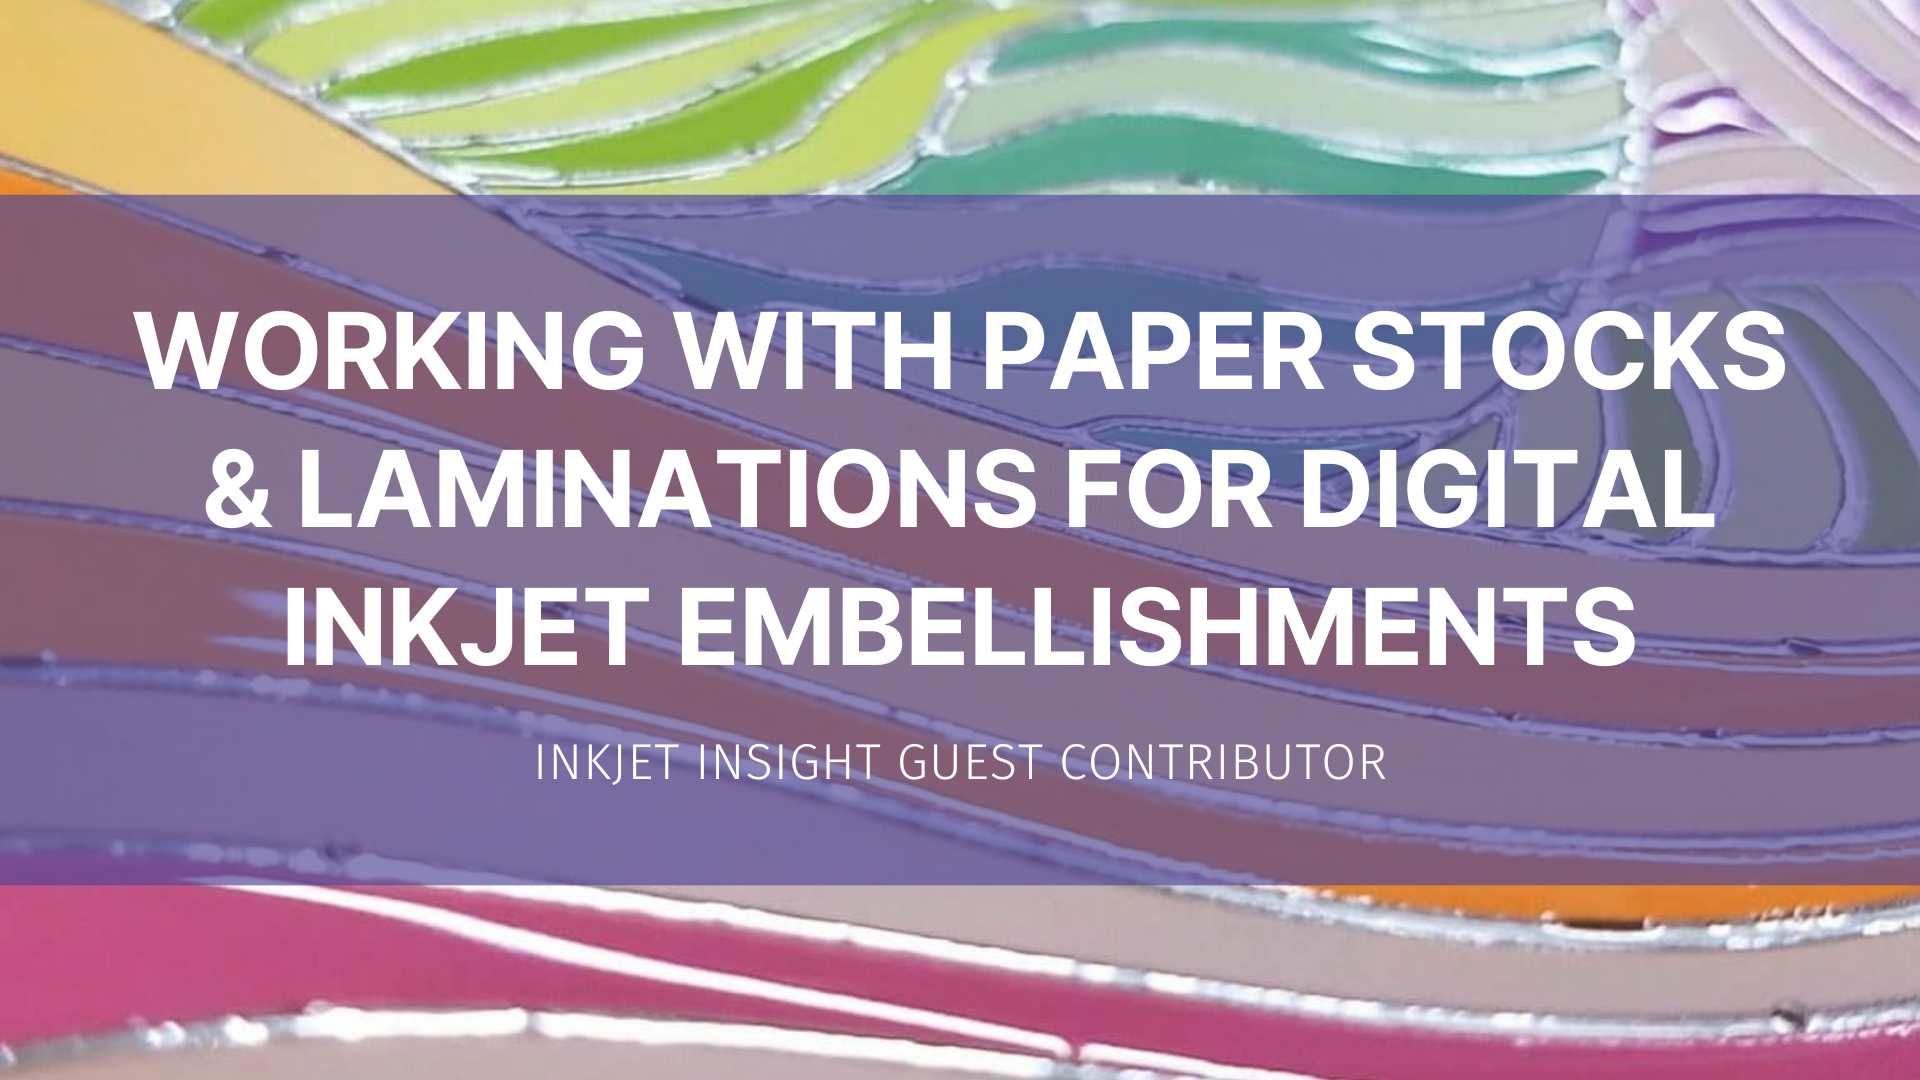 Featured image for “Working with paper stocks and laminations for digital inkjet embellishments”